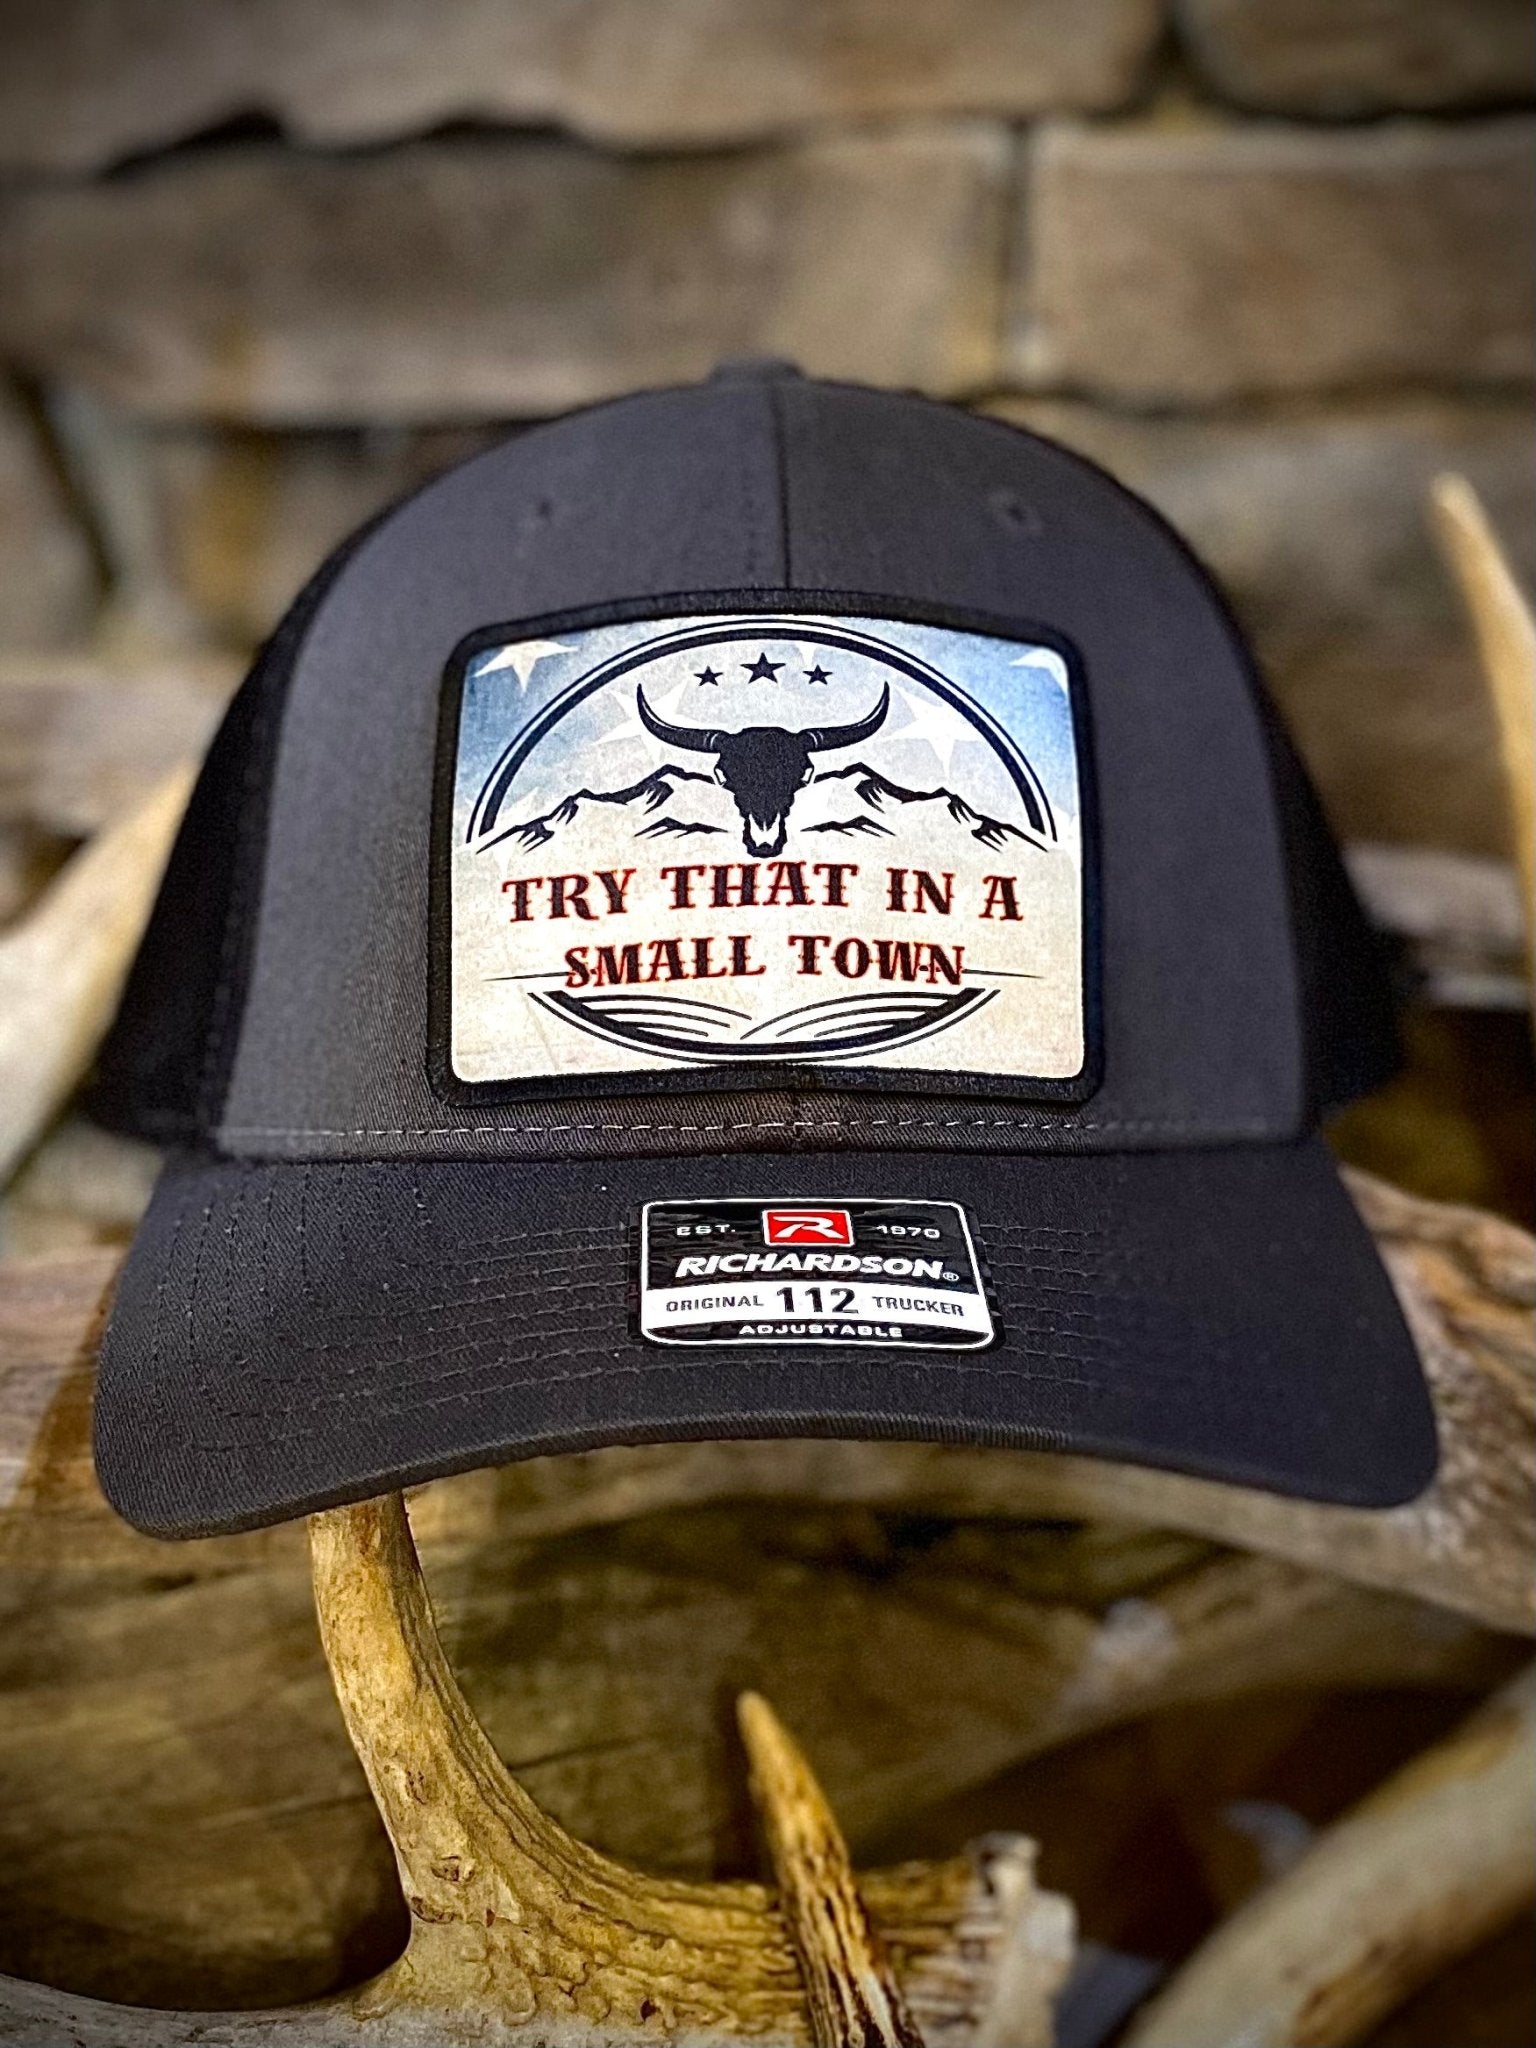 TRY THAT BULL SKULL CAP - CountryFide Custom Accessories and Outdoors